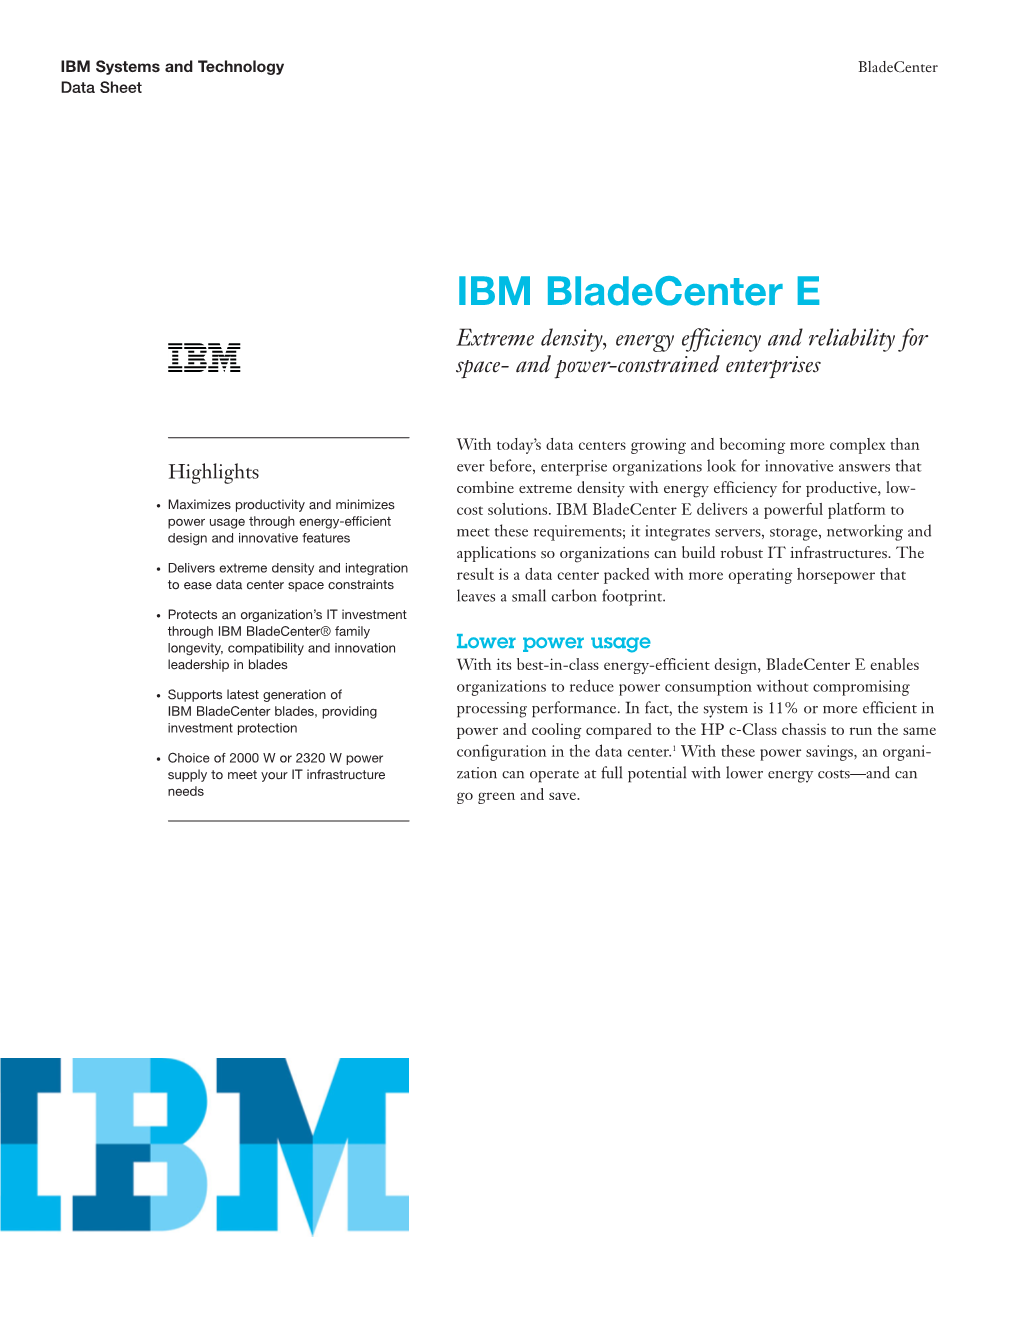 IBM Bladecenter E Chassis at a Glance